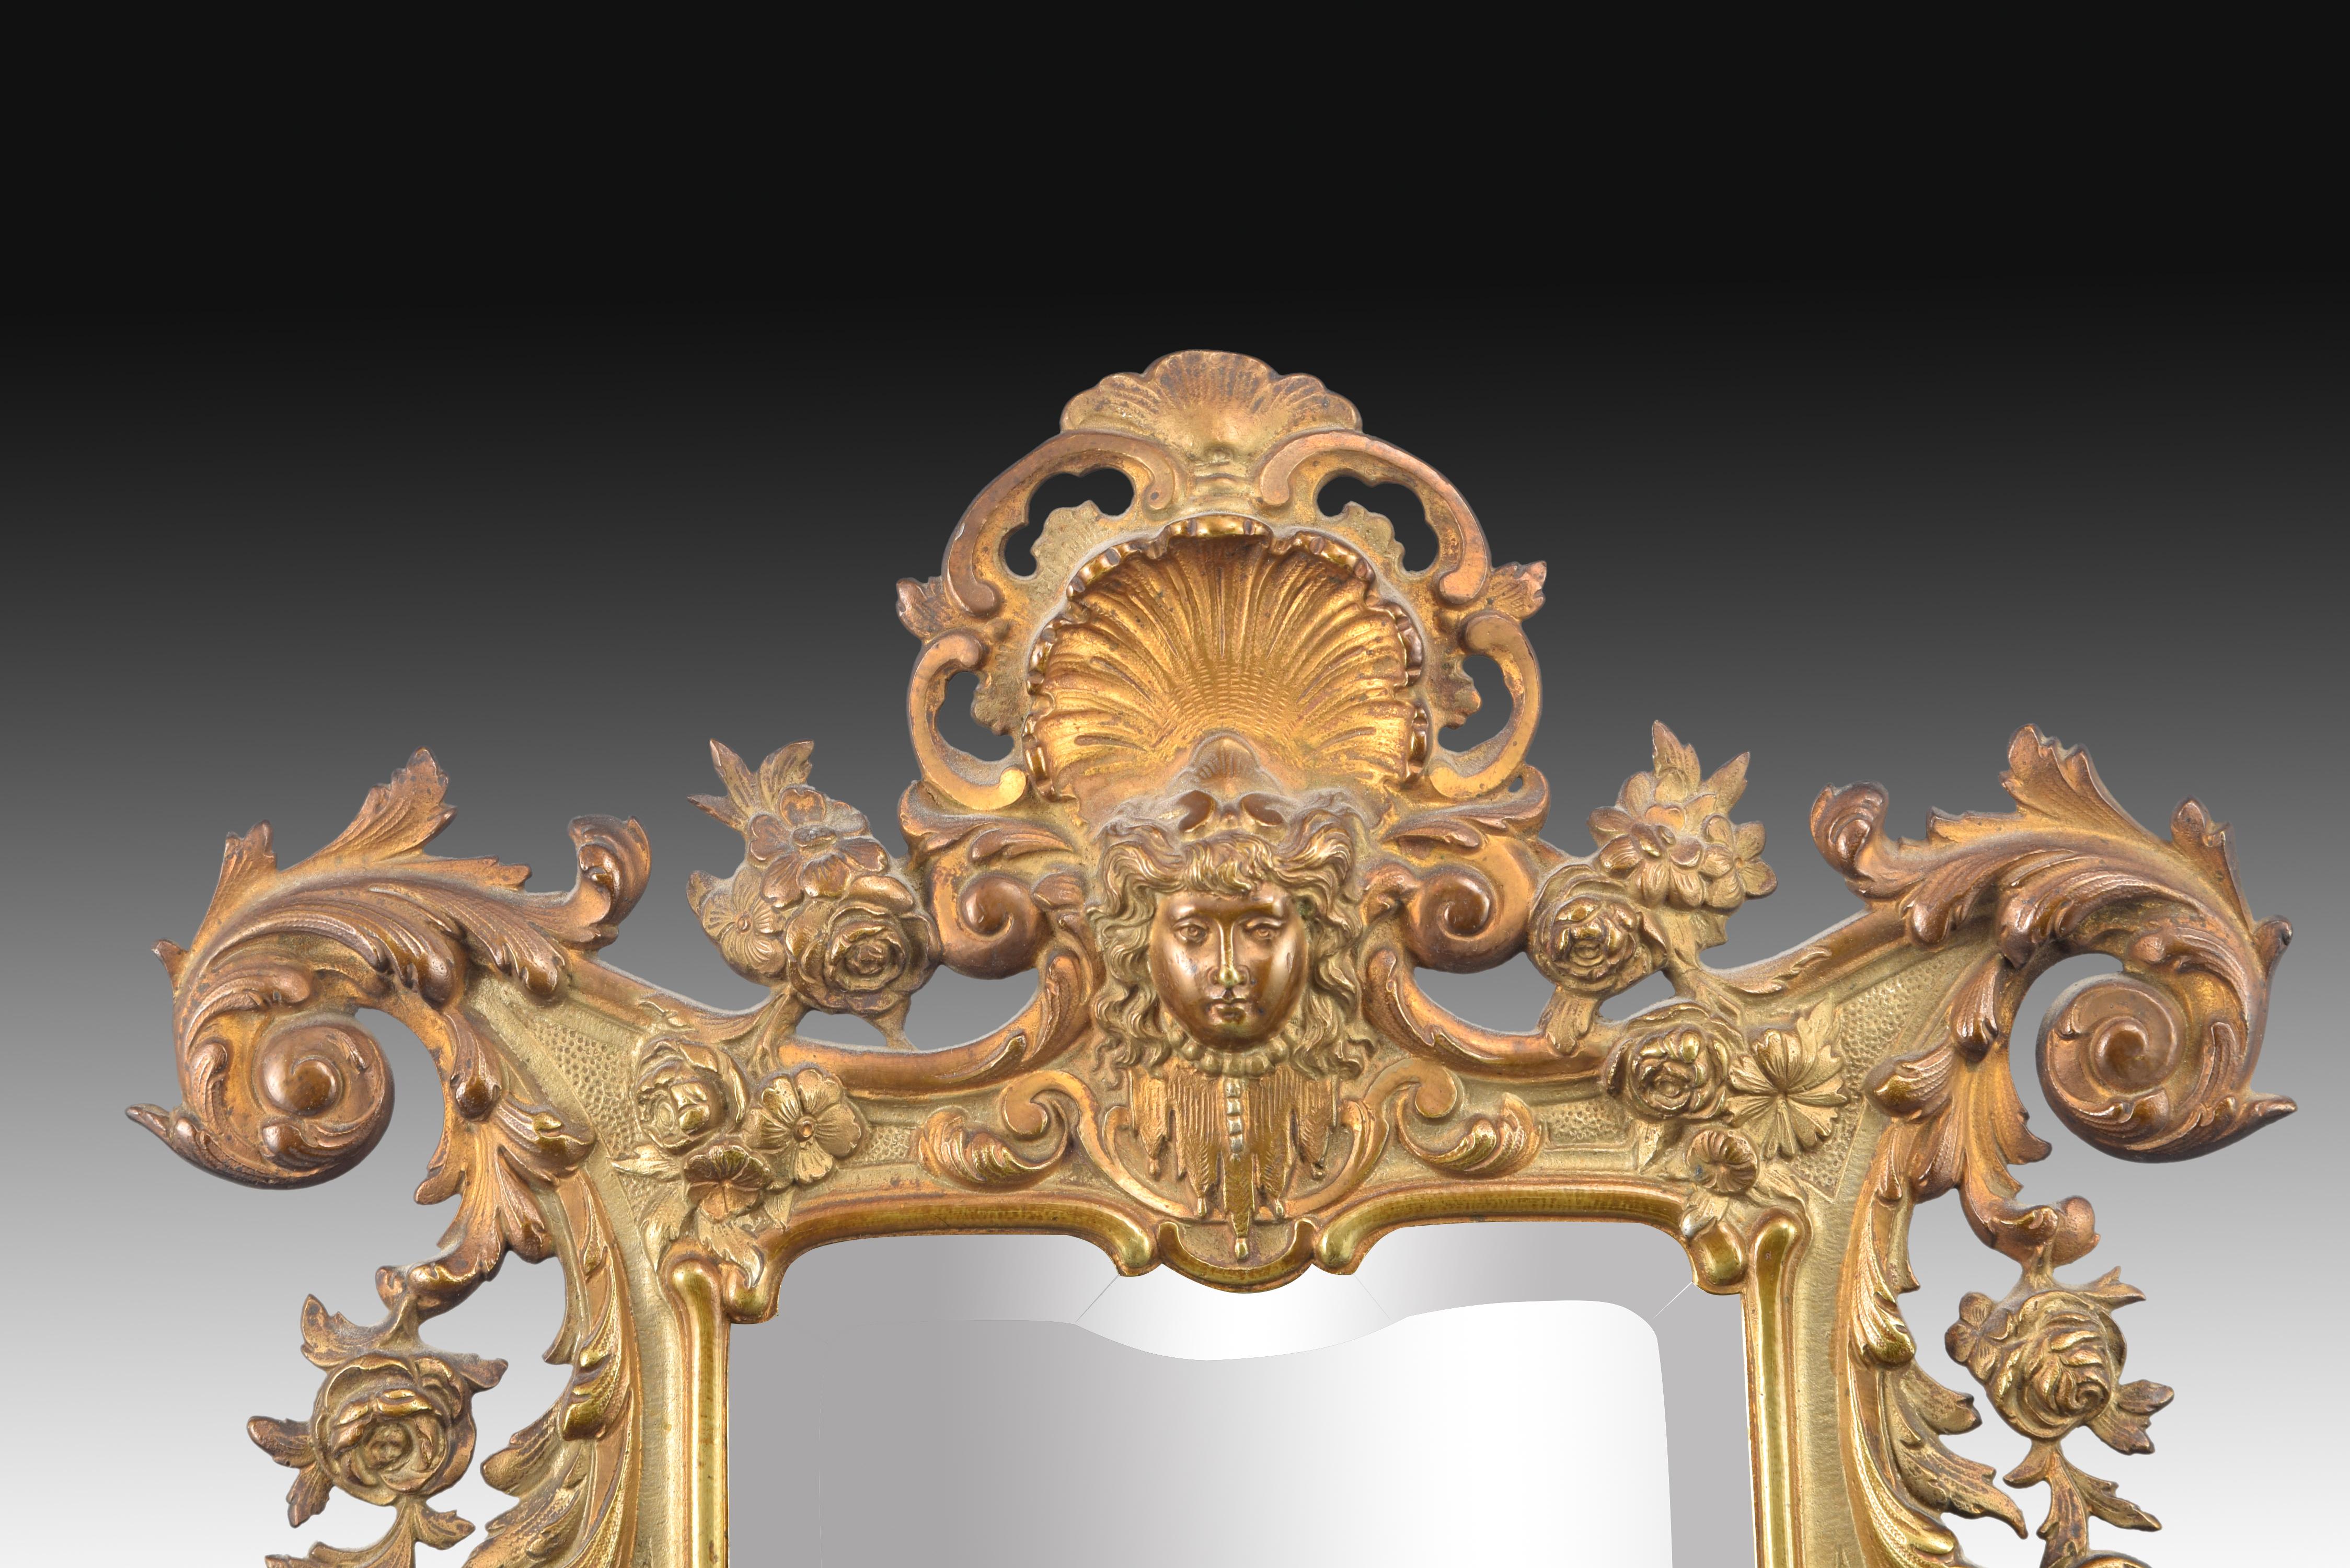 Mirror. Bronze, 19th century.
Rectangular mirror with the frame made of bronze and decorated with an elaborate composition, partially openwork, arranged symmetrically in the two lateral halves based on plant elements, architectural motifs, scrolls,